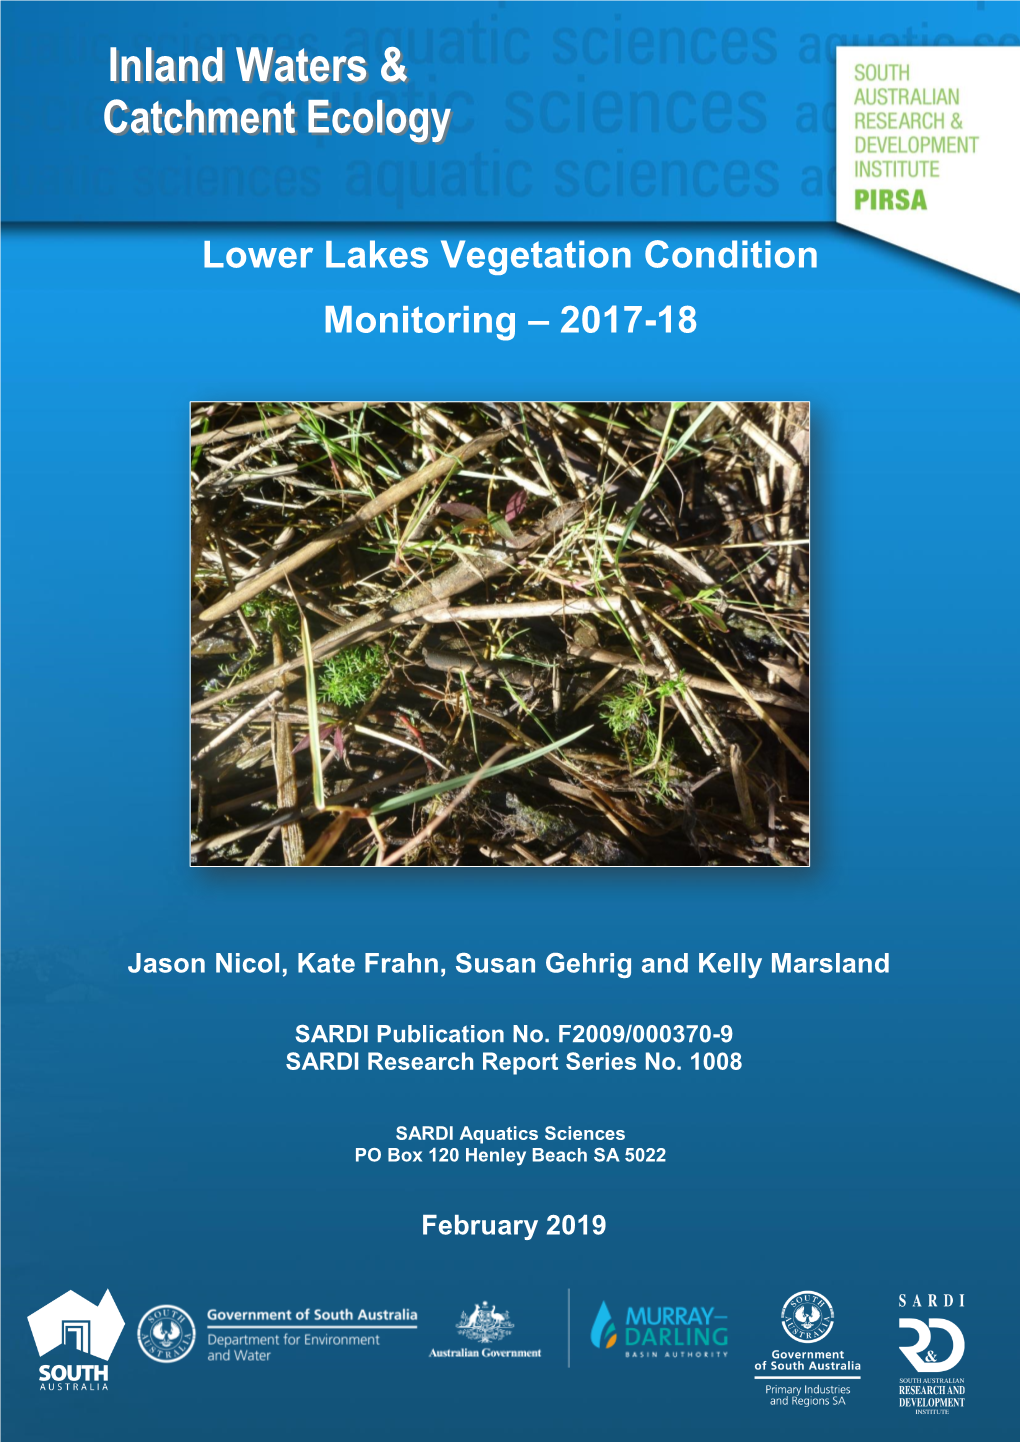 Lower Lakes Vegetation Condition Monitoring – 2017-18